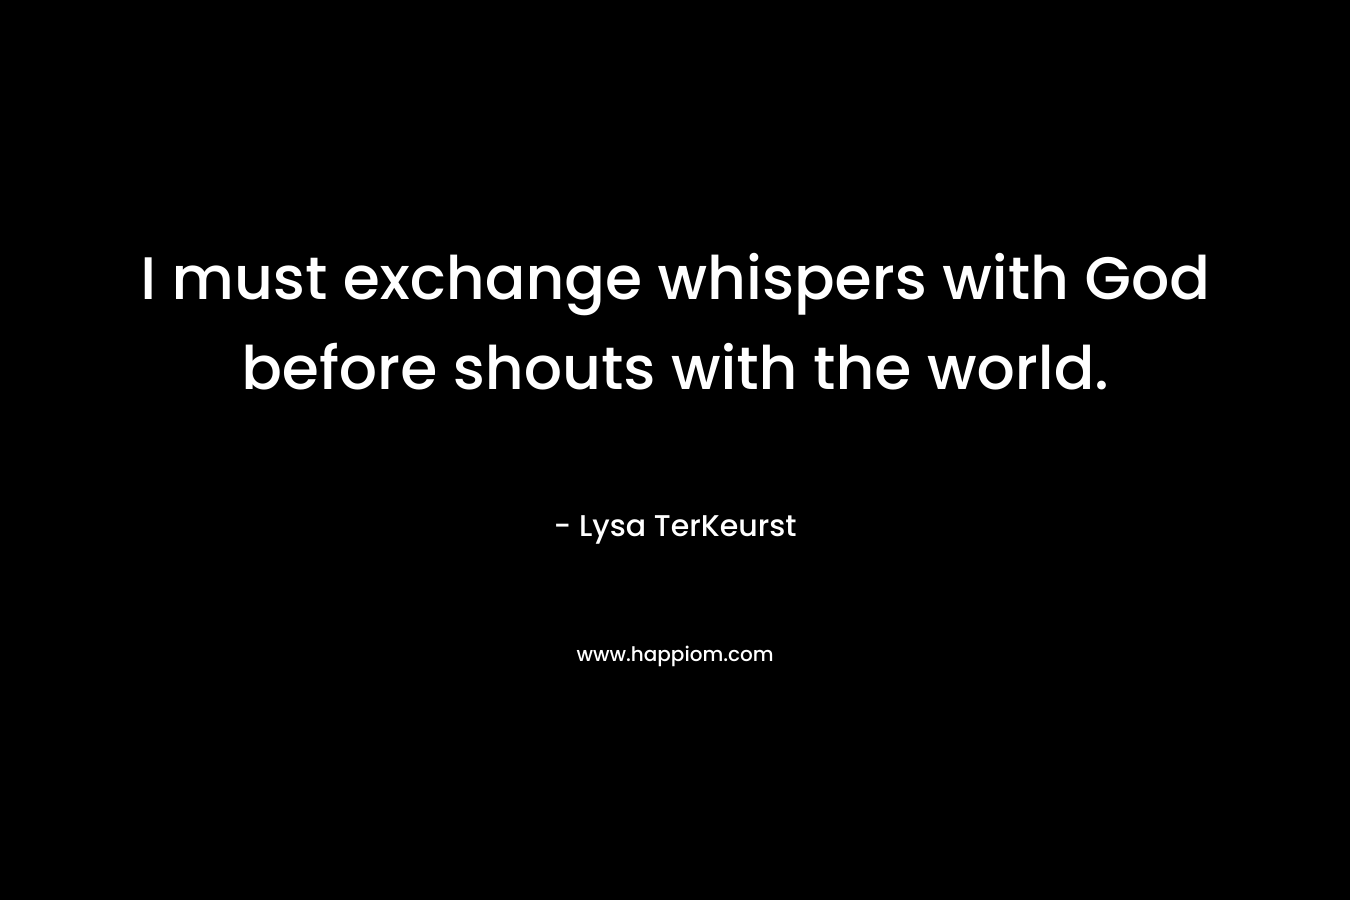 I must exchange whispers with God before shouts with the world. – Lysa TerKeurst